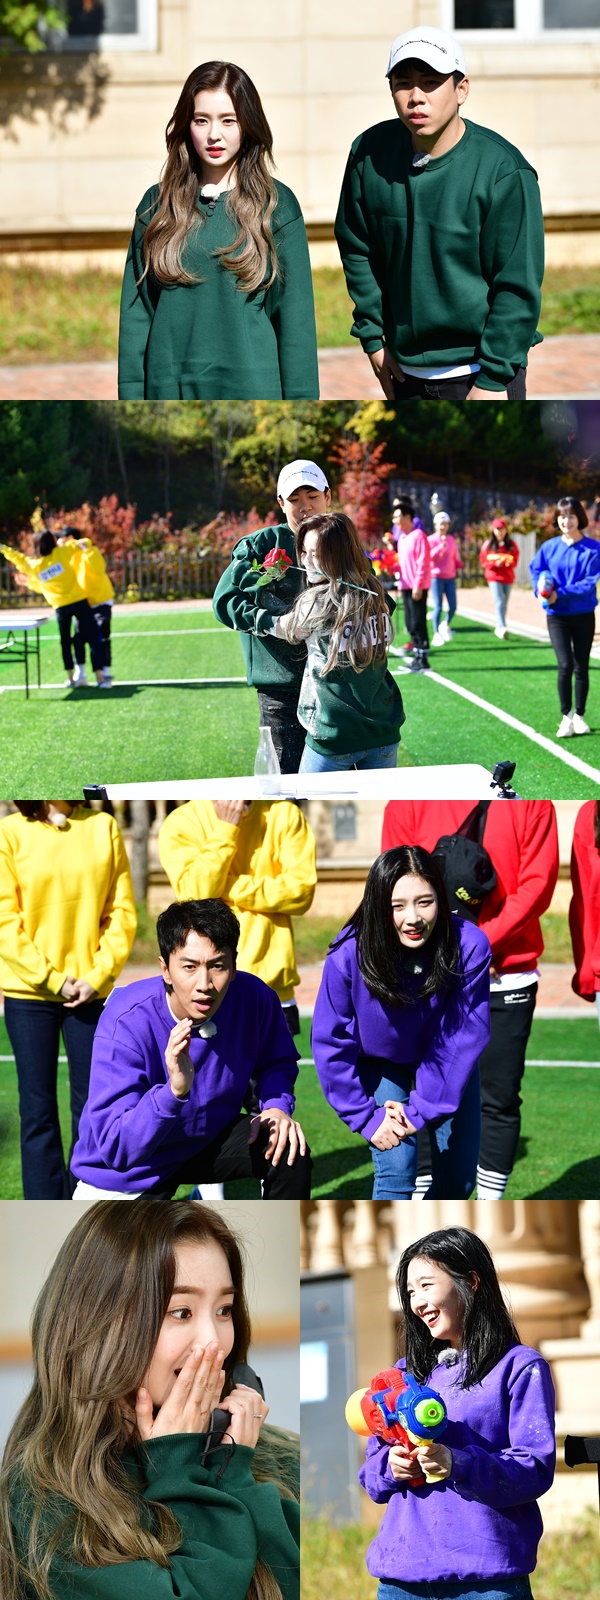 Irene, Yang Se-chan show unexpected couple ChemieOn SBS Running Man, which will be broadcast on November 25, Boiler Couple Red Velvet Irene and Comedian Yang Se-chan will play.Yang Se-chan, who has been attracting attention with Irene and shocking synthetic photos in the last broadcast, said, (Oh! Oh! Ill put you in a warm place!(Lin) Lin ** Lee! I was cheered by everyone by Irenes choice.With Irene and Yang Se-chan expected to play a couple, Red Velvet Irene and Joey captivated the members with their drama and drama charm.Irene laughed at the members by calling them pretty Ji Suk-jin with the charm of walking my way without understanding the rules late or bowing to the surrounding situation.Joey, on the other hand, became a Chain Reaction rich man who immediately reacted with a big smile even after the members words, and the members added, Joey is like a balloon at the venue because Chain Reaction is so big.